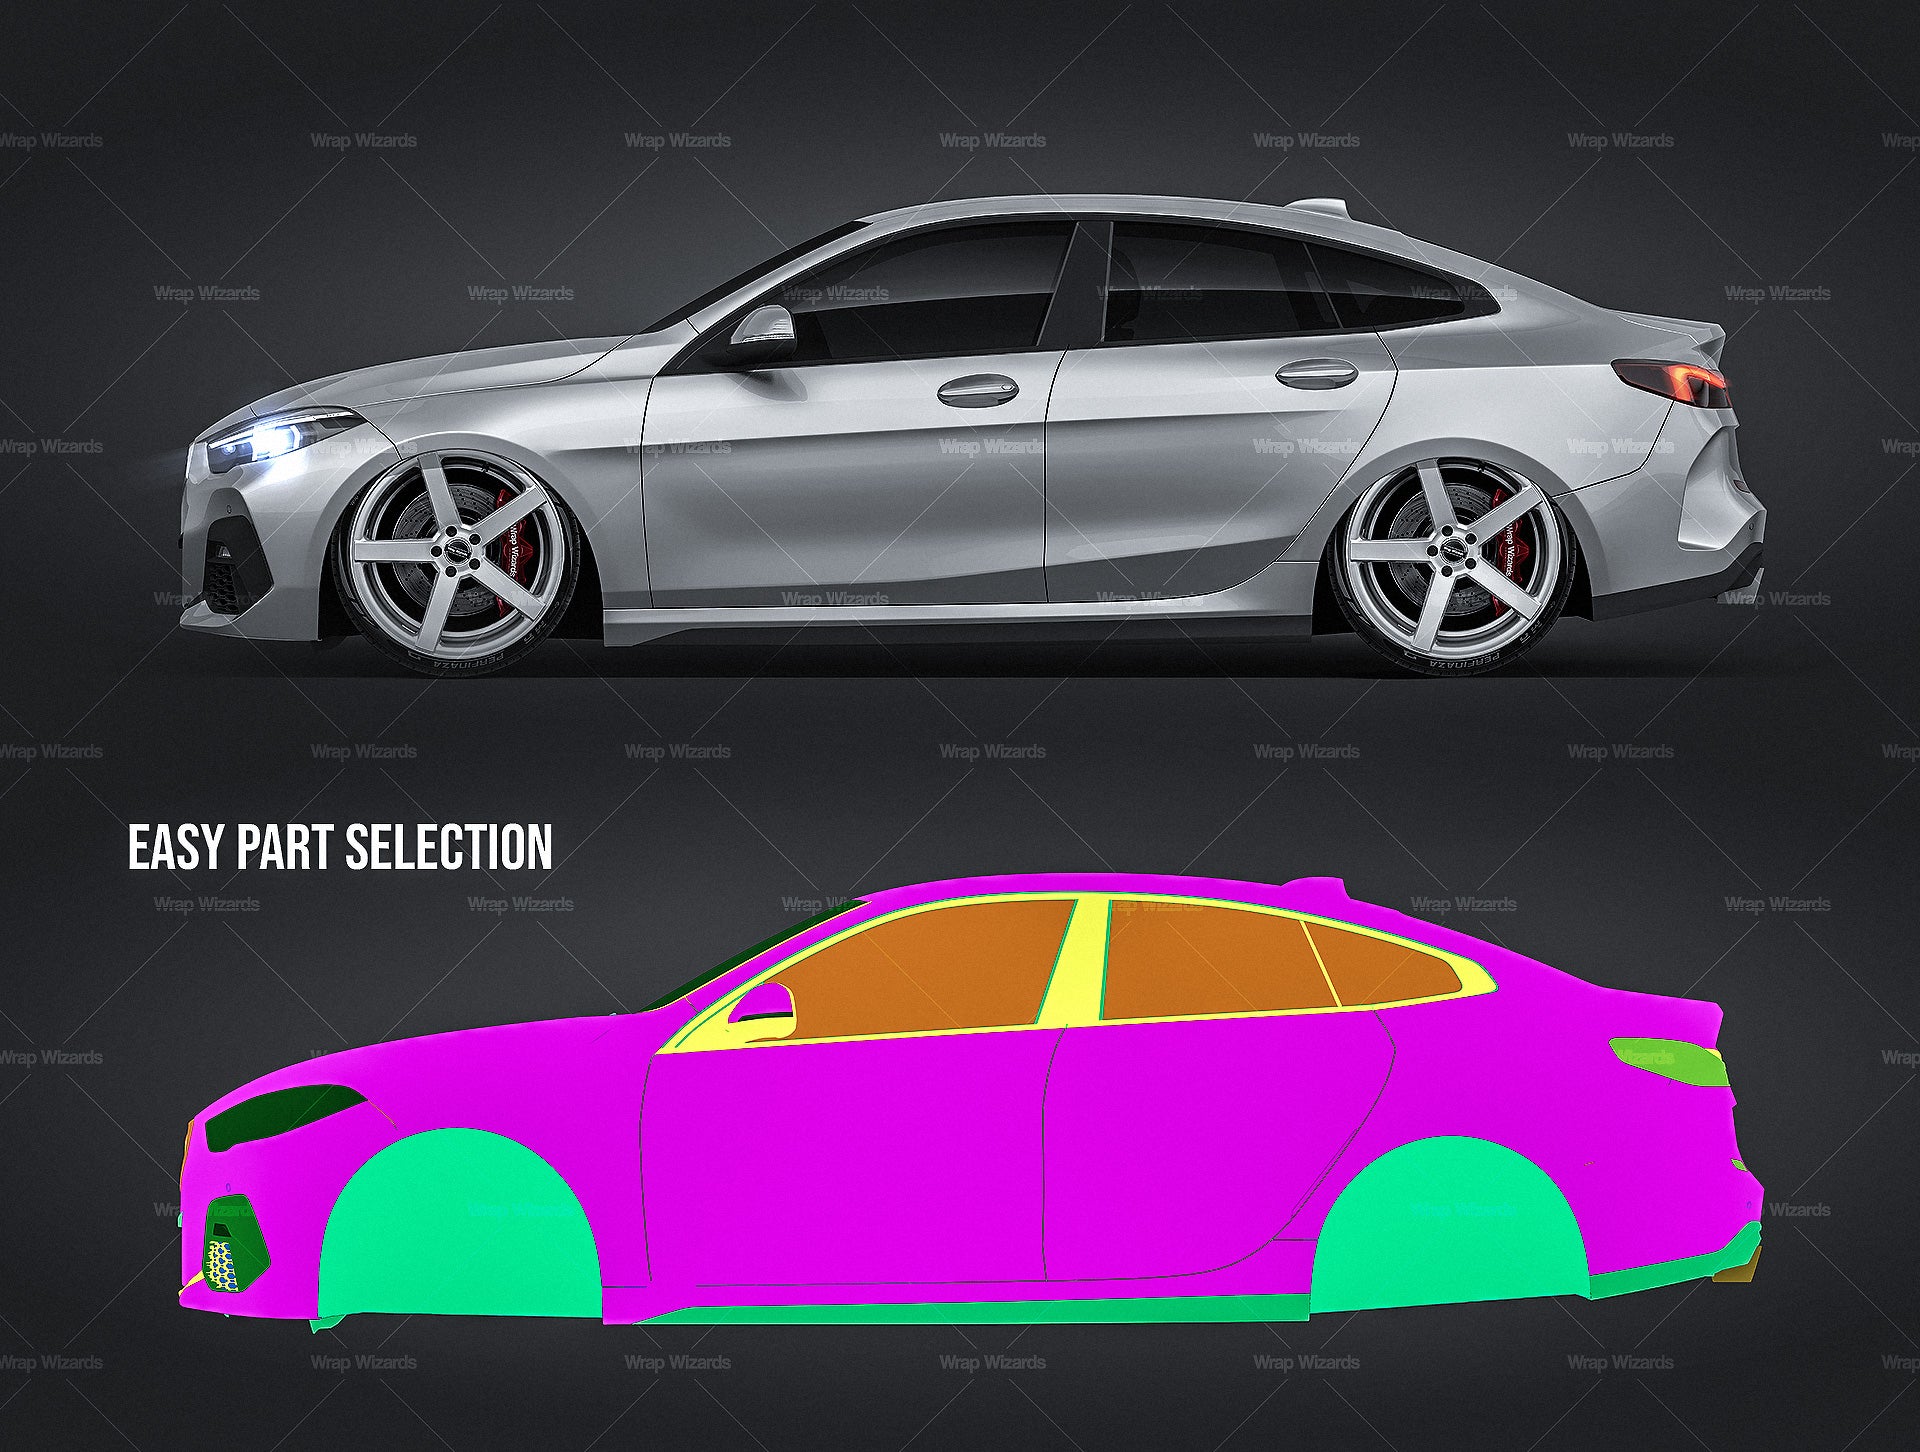 BMW 2 Series Gran Coupe 2020 glossy finish - all sides Car Mockup Template.psd